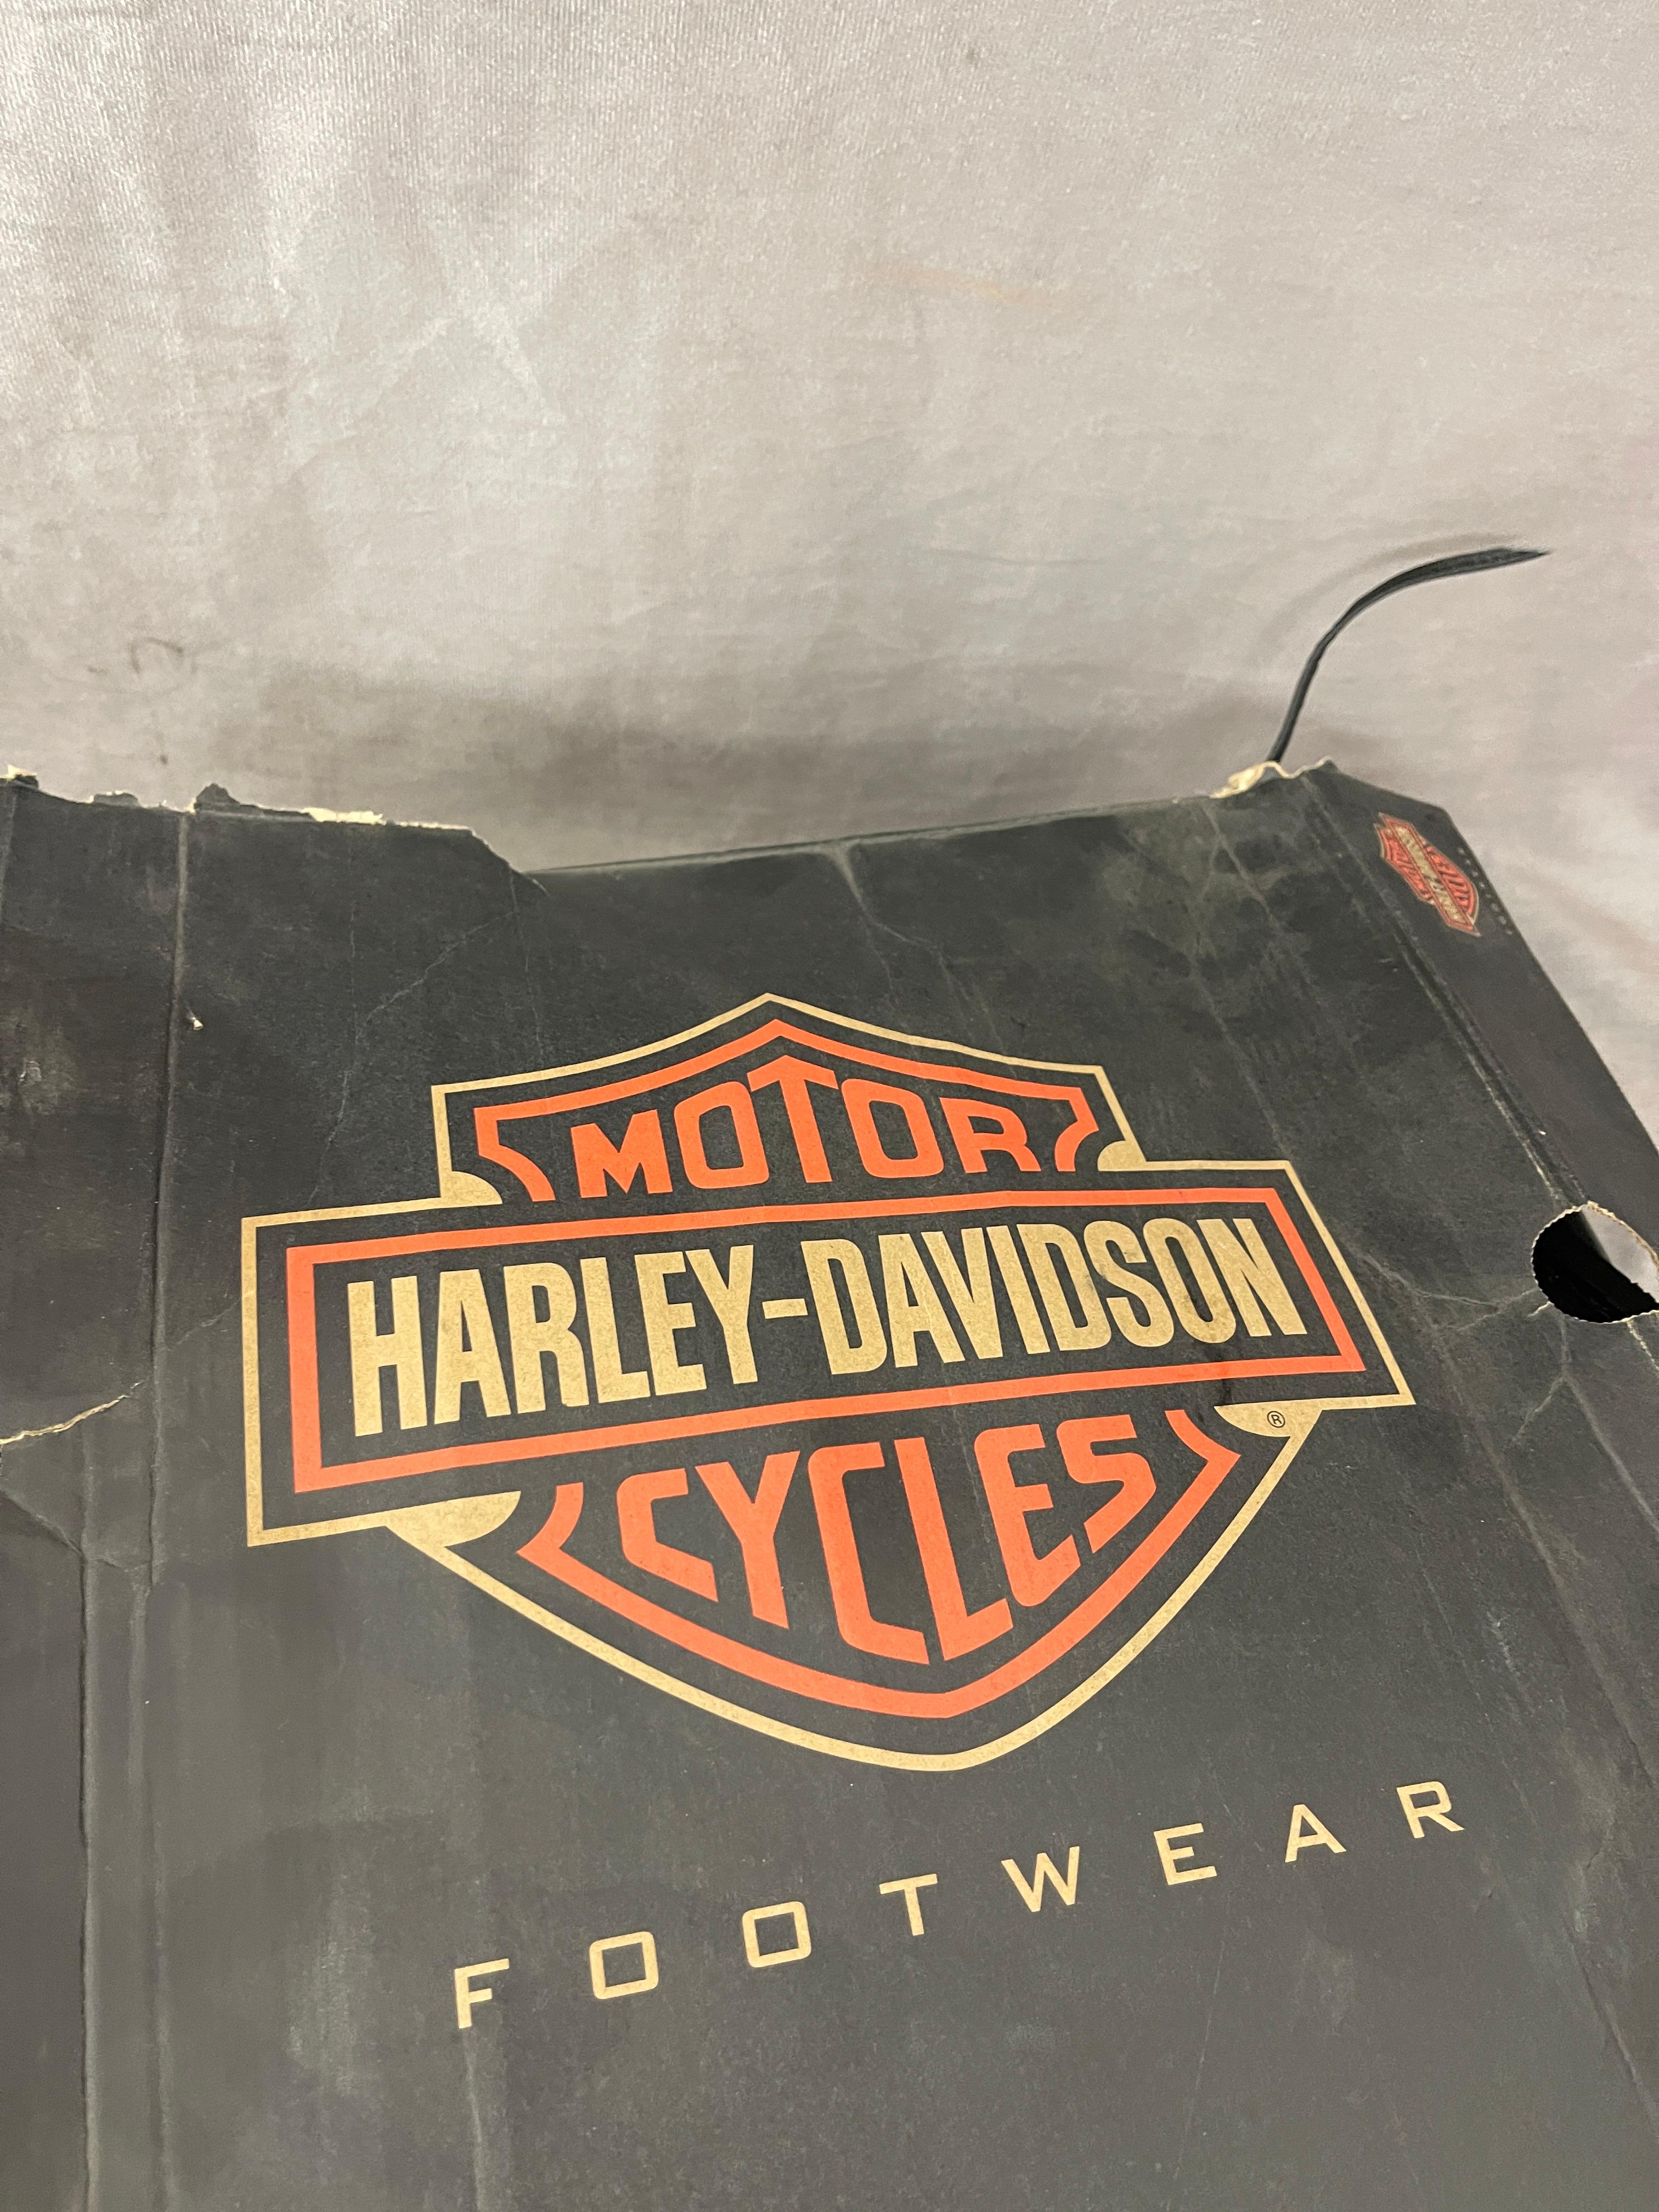 Harley Davidson Leather Accessory, Boots, Chaps Vest Collection